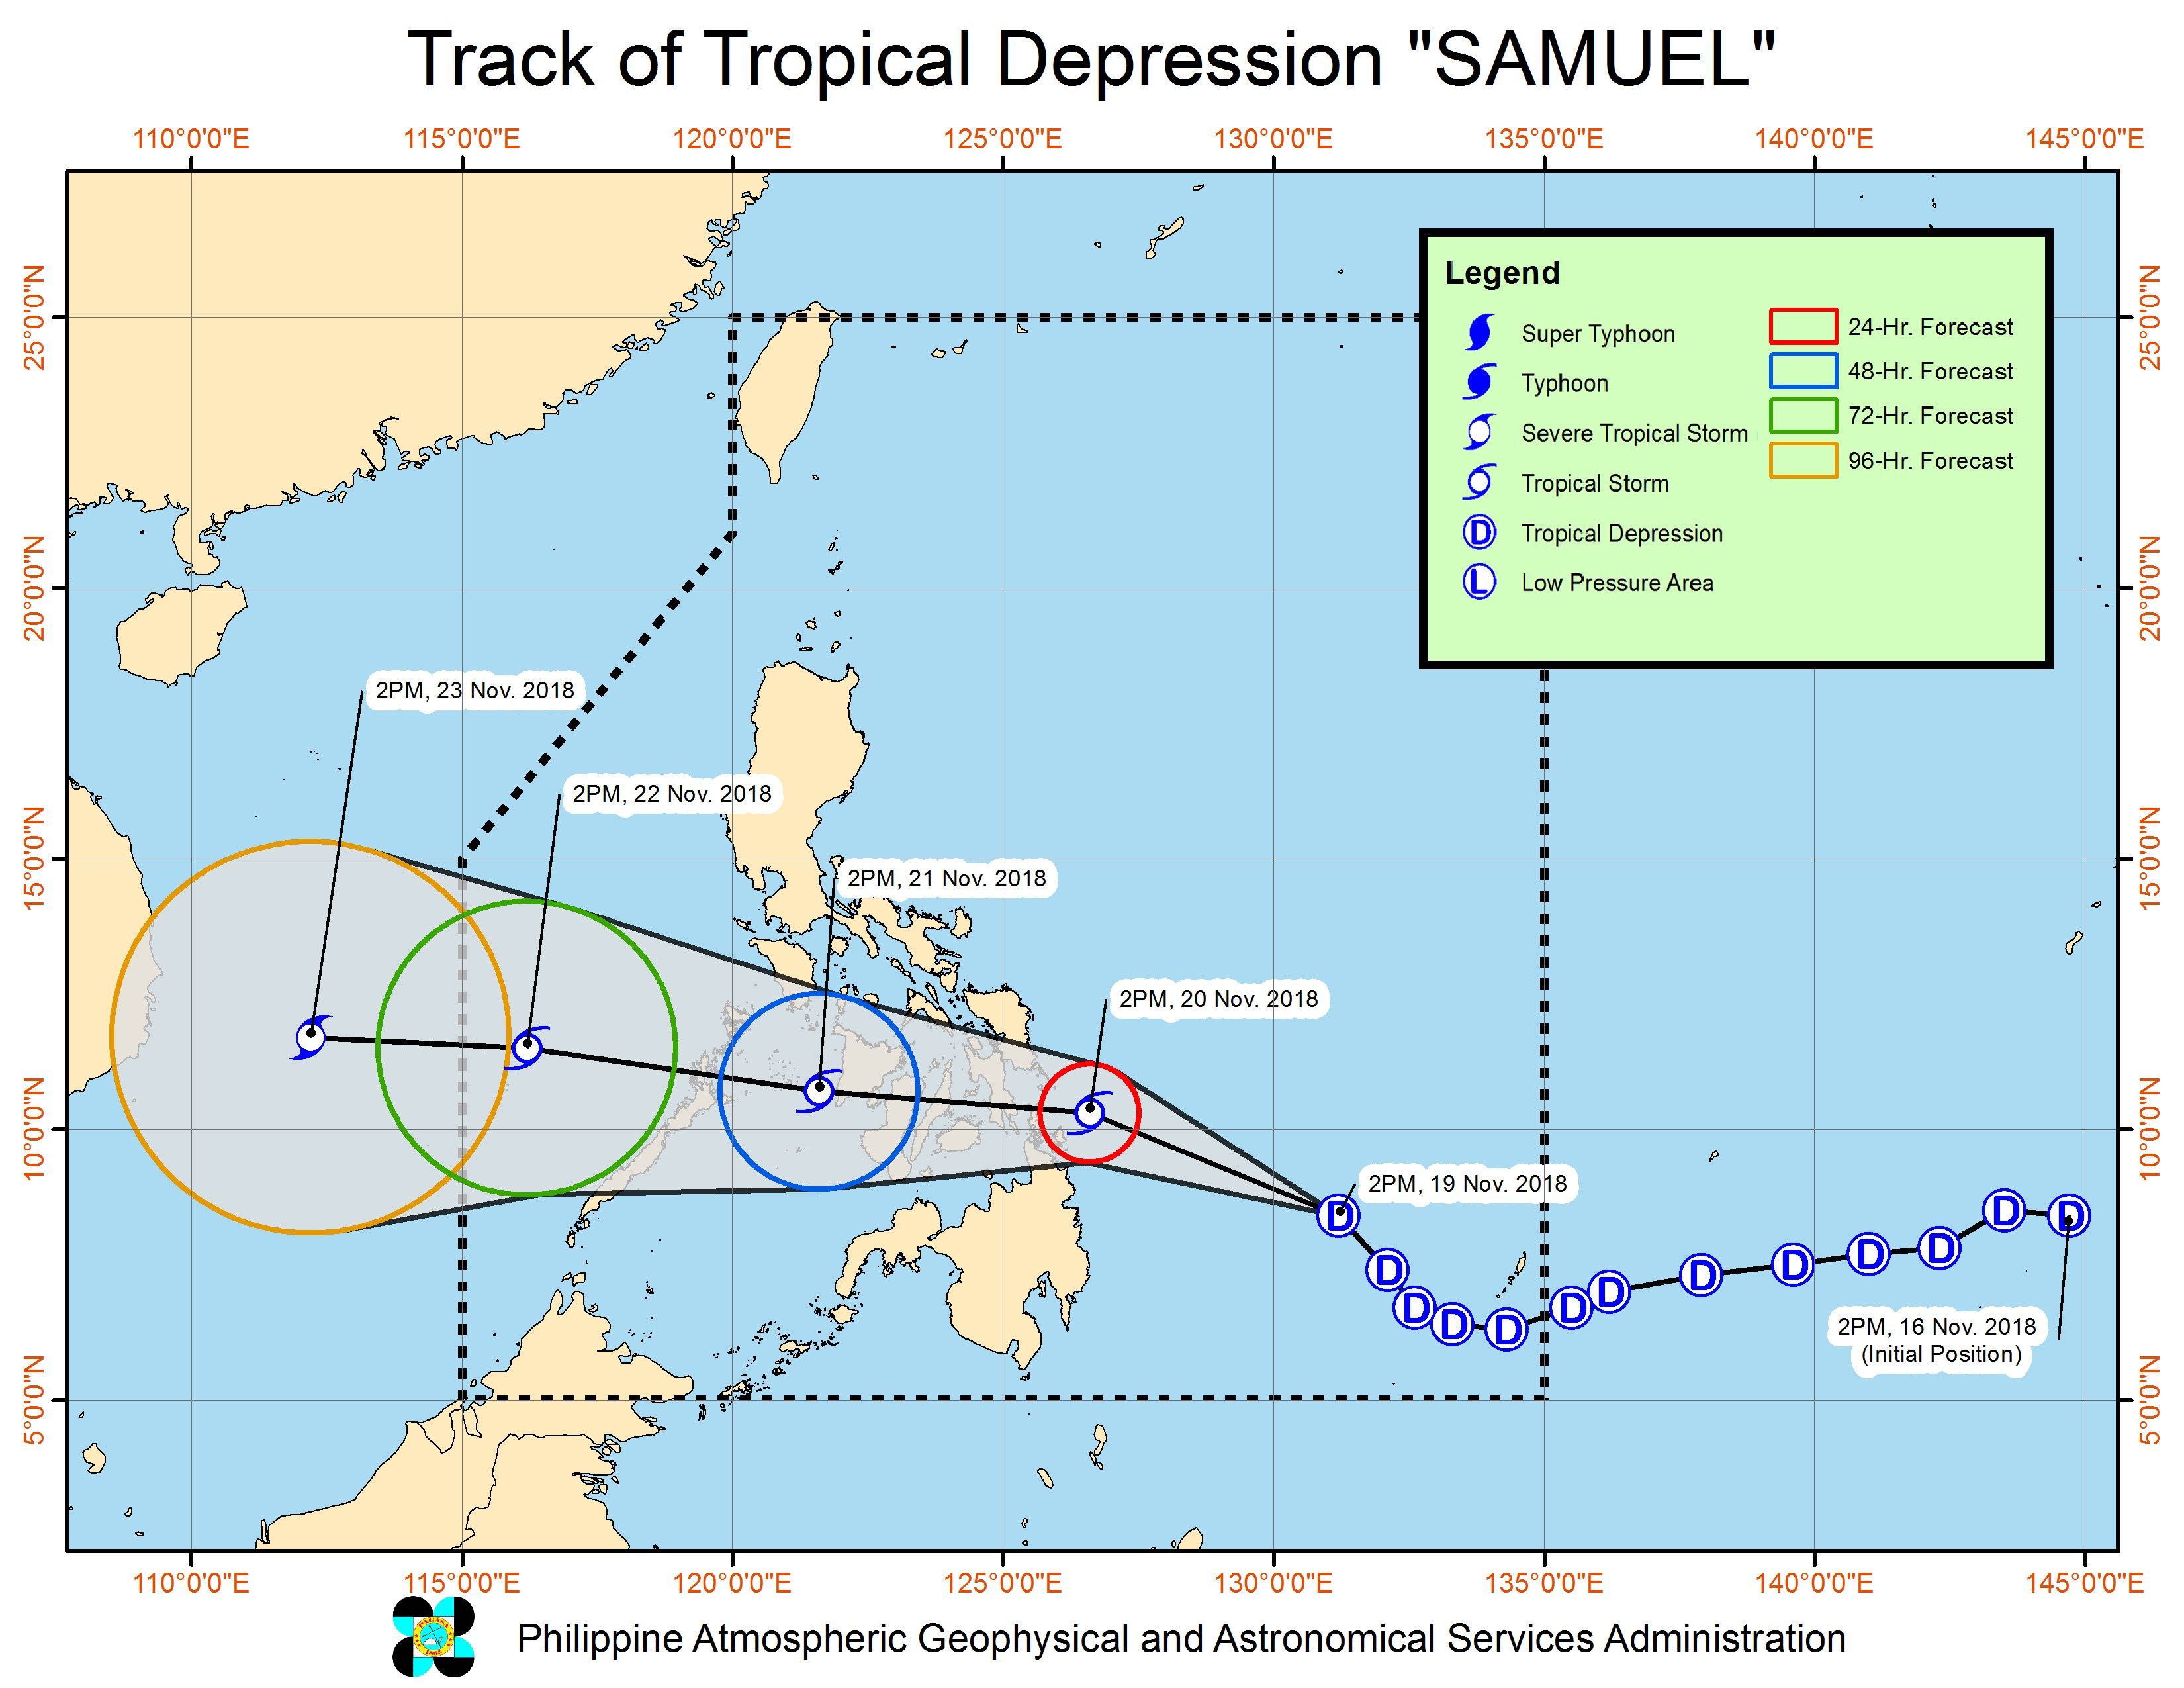 Forecast track of Tropical Depression Samuel as of November 19, 2018, 5 pm. Image from PAGASA 